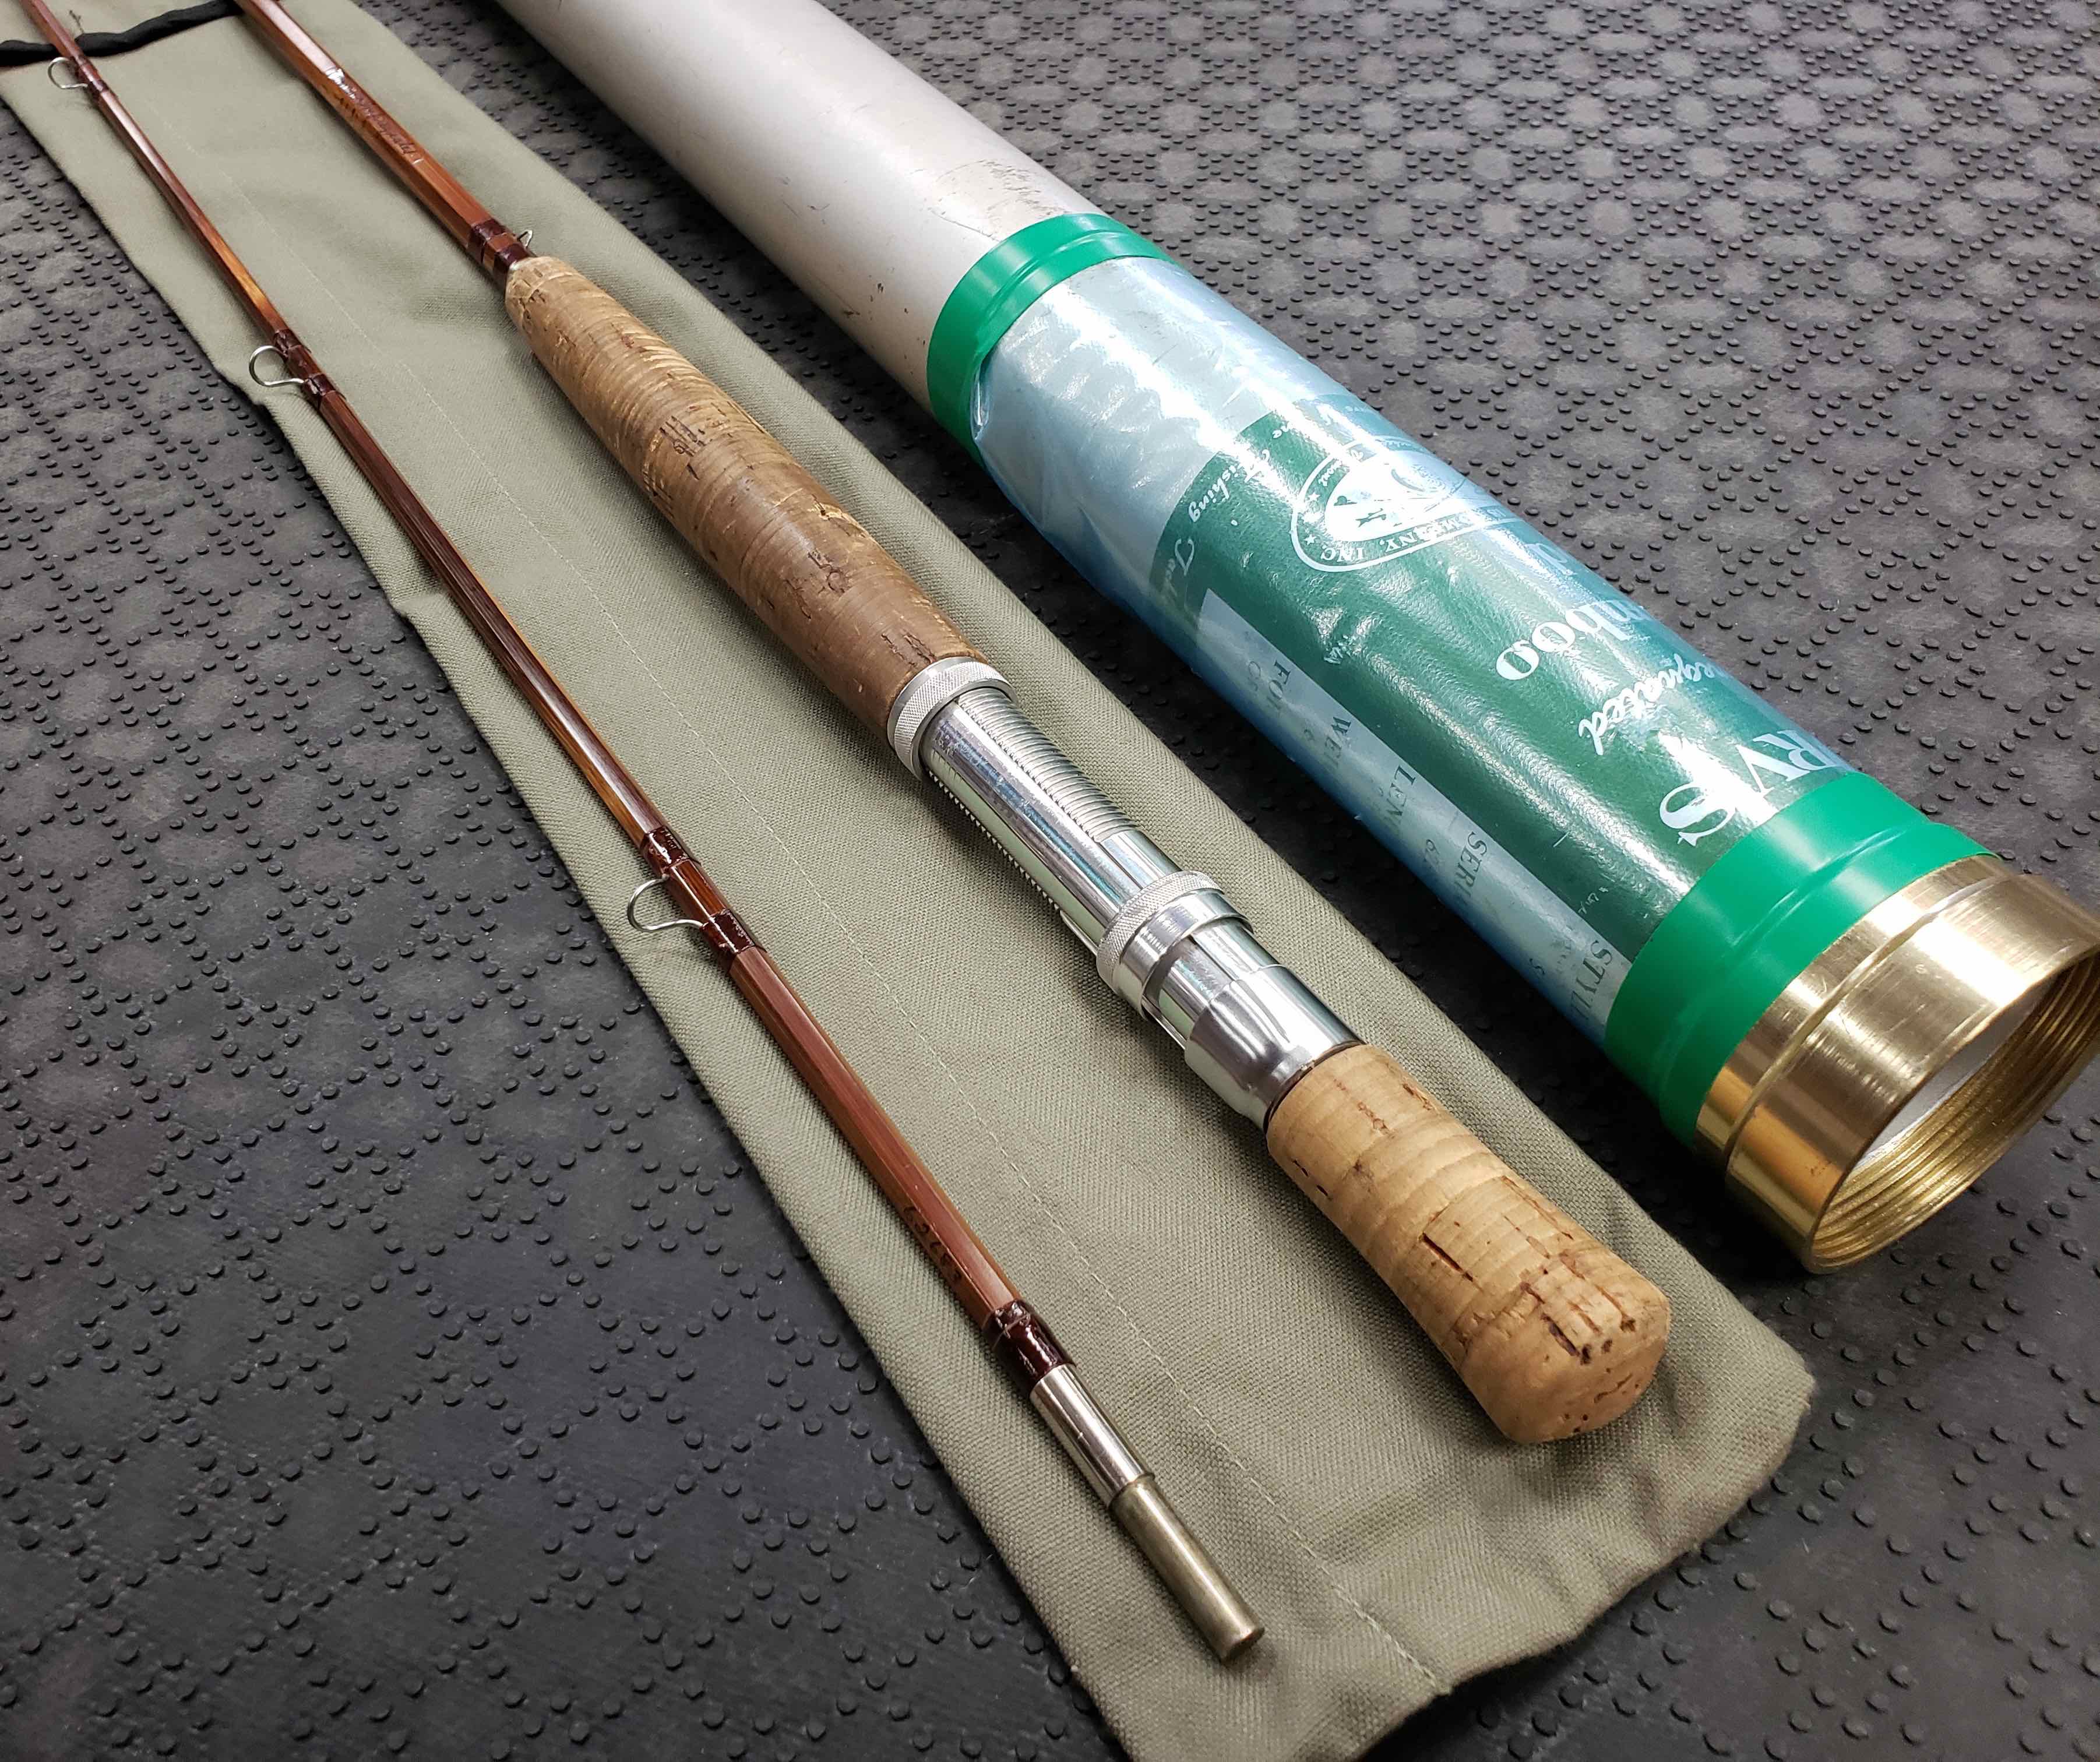 Fly Fishing Rods – The First Cast – Hook, Line and Sinker's Fly